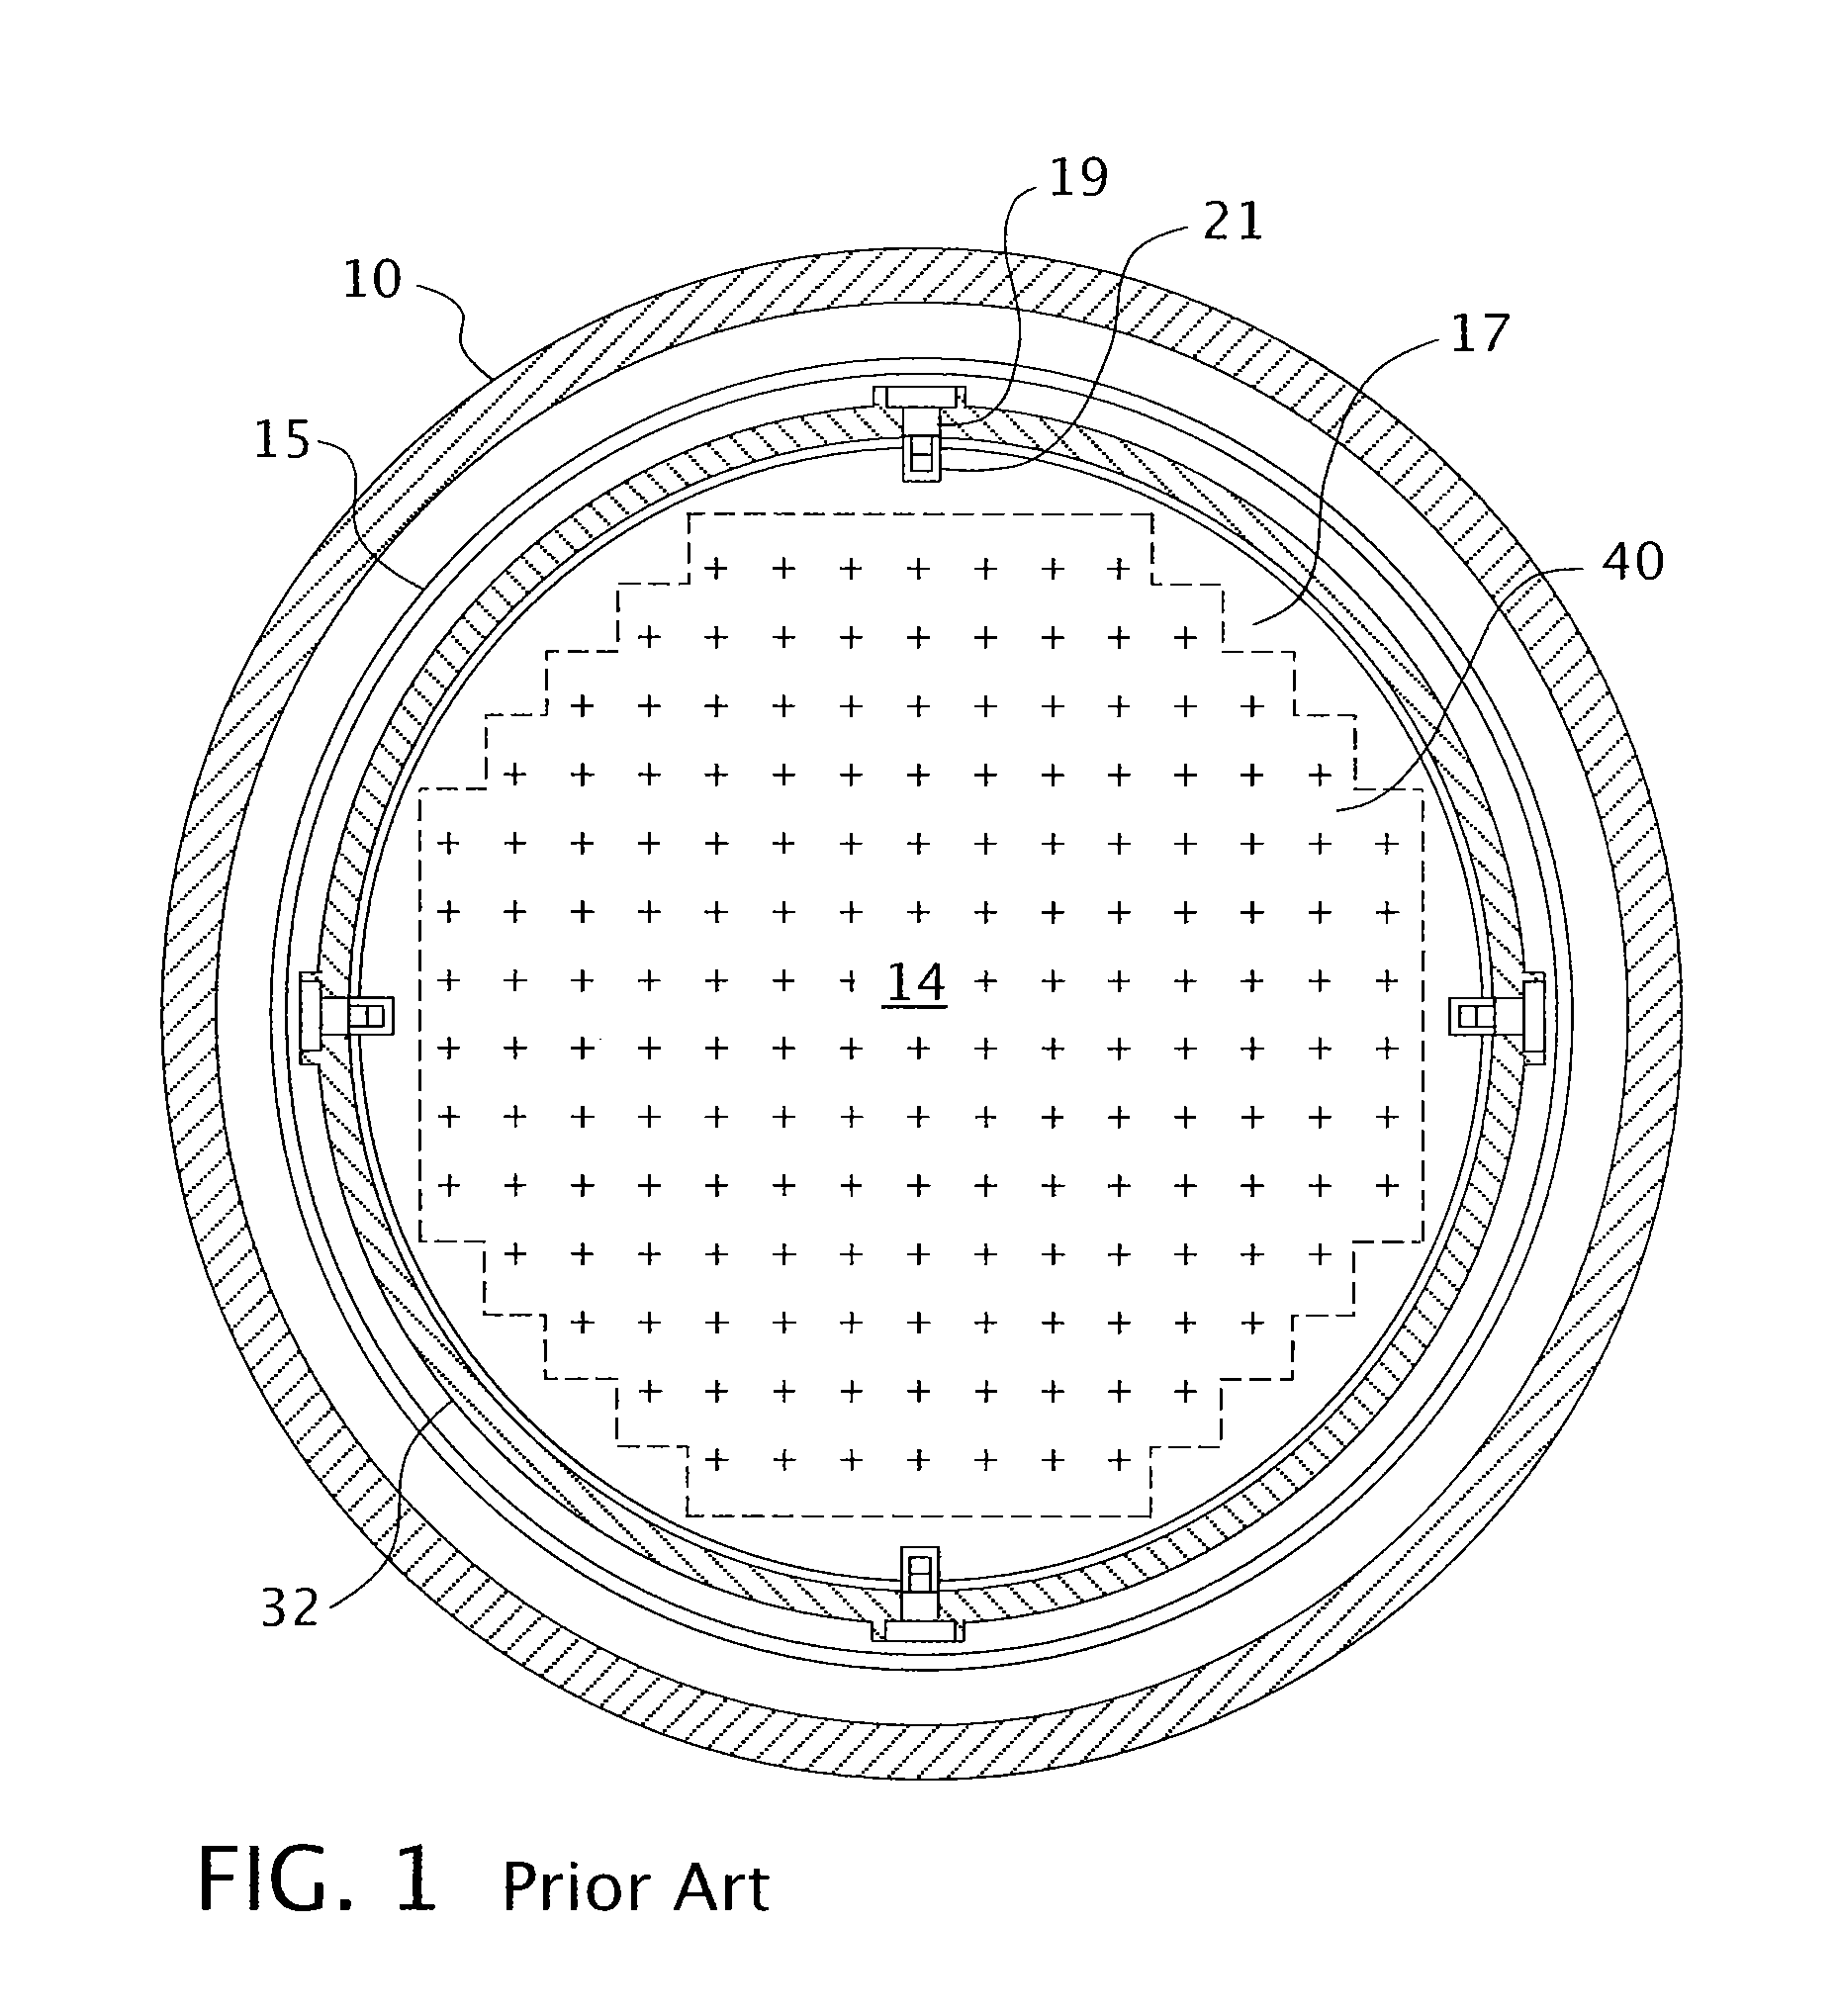 Nuclear reactor internals alignment configuration